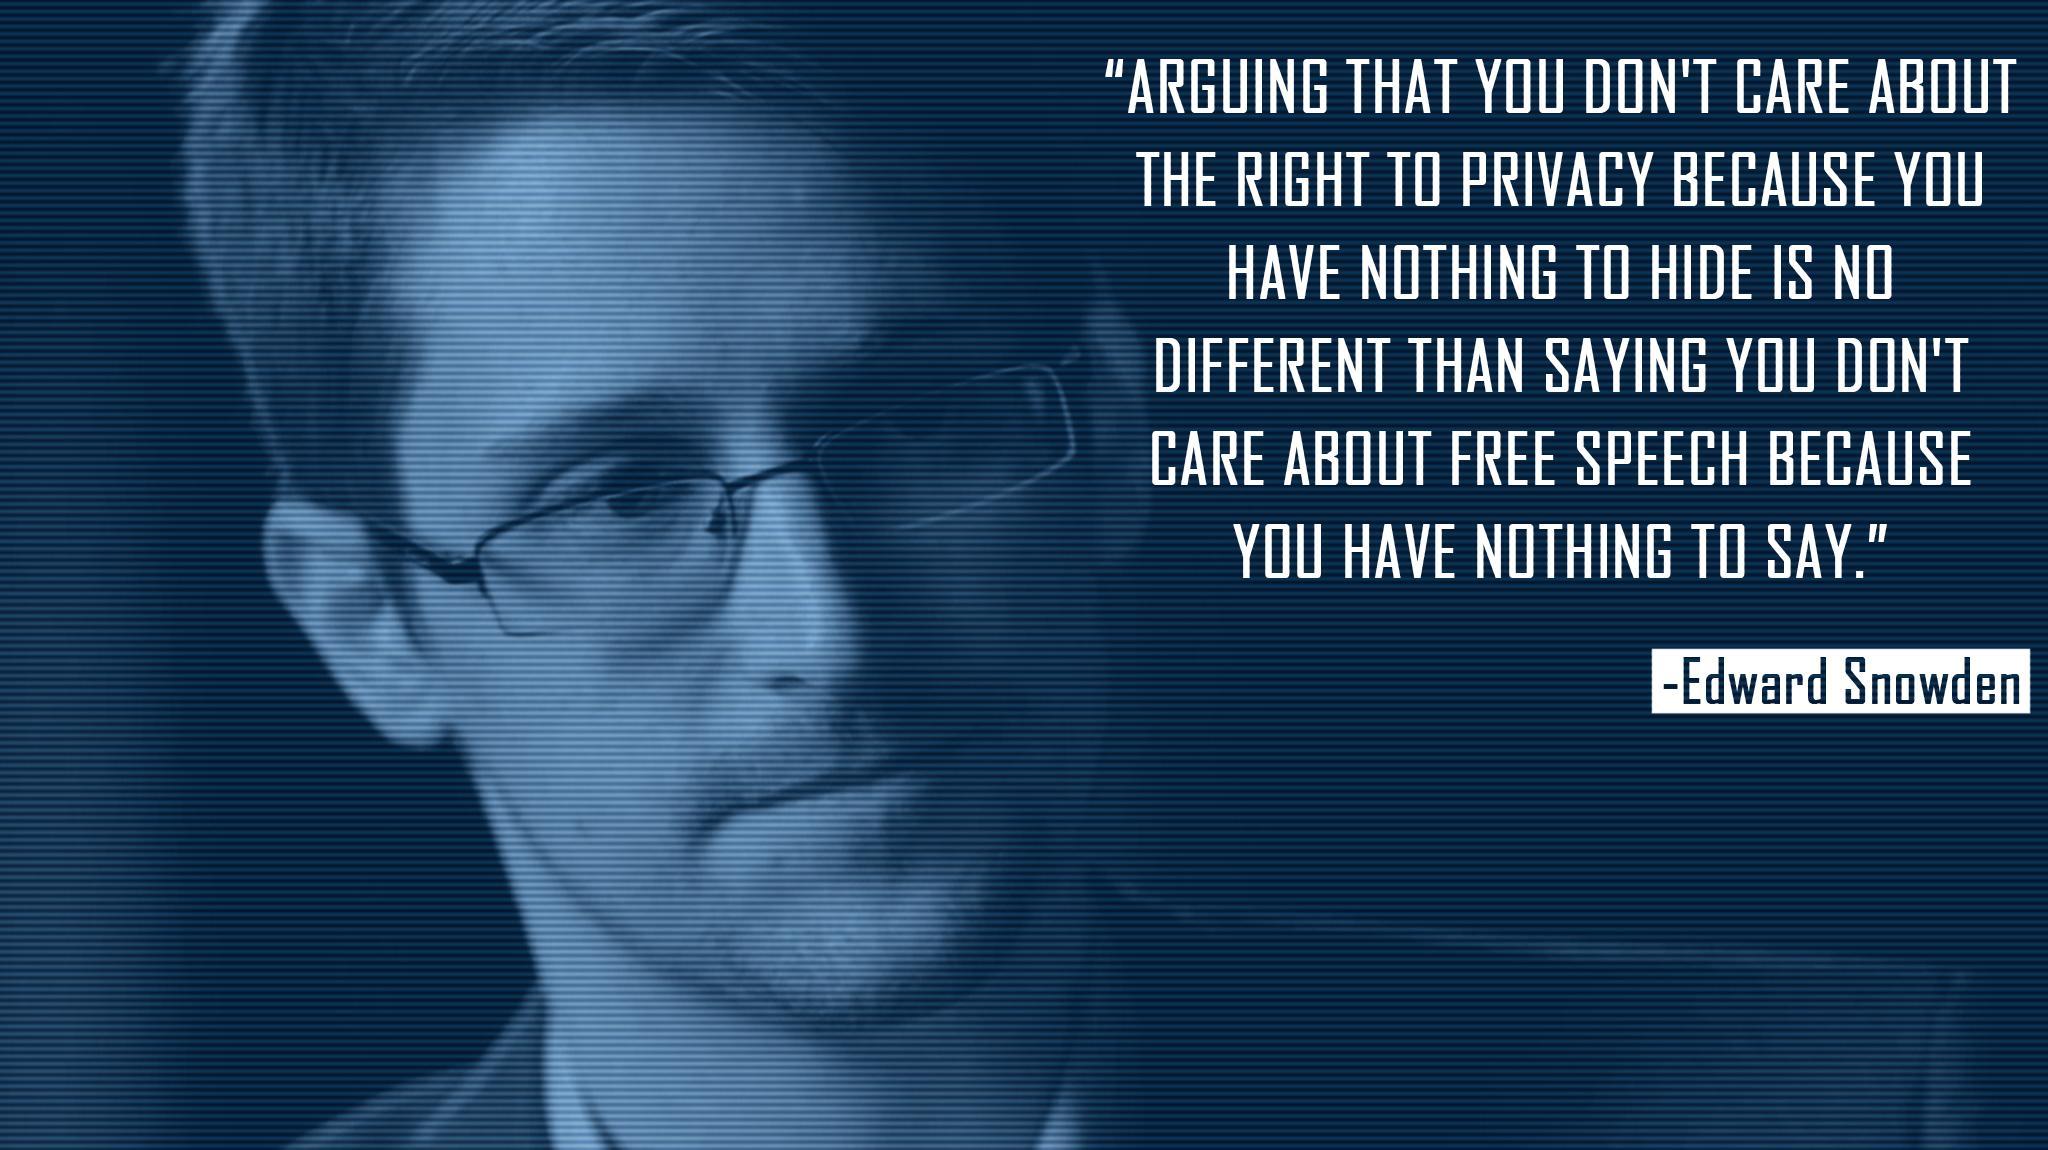 Edward Snowden on the nothing to hide argument